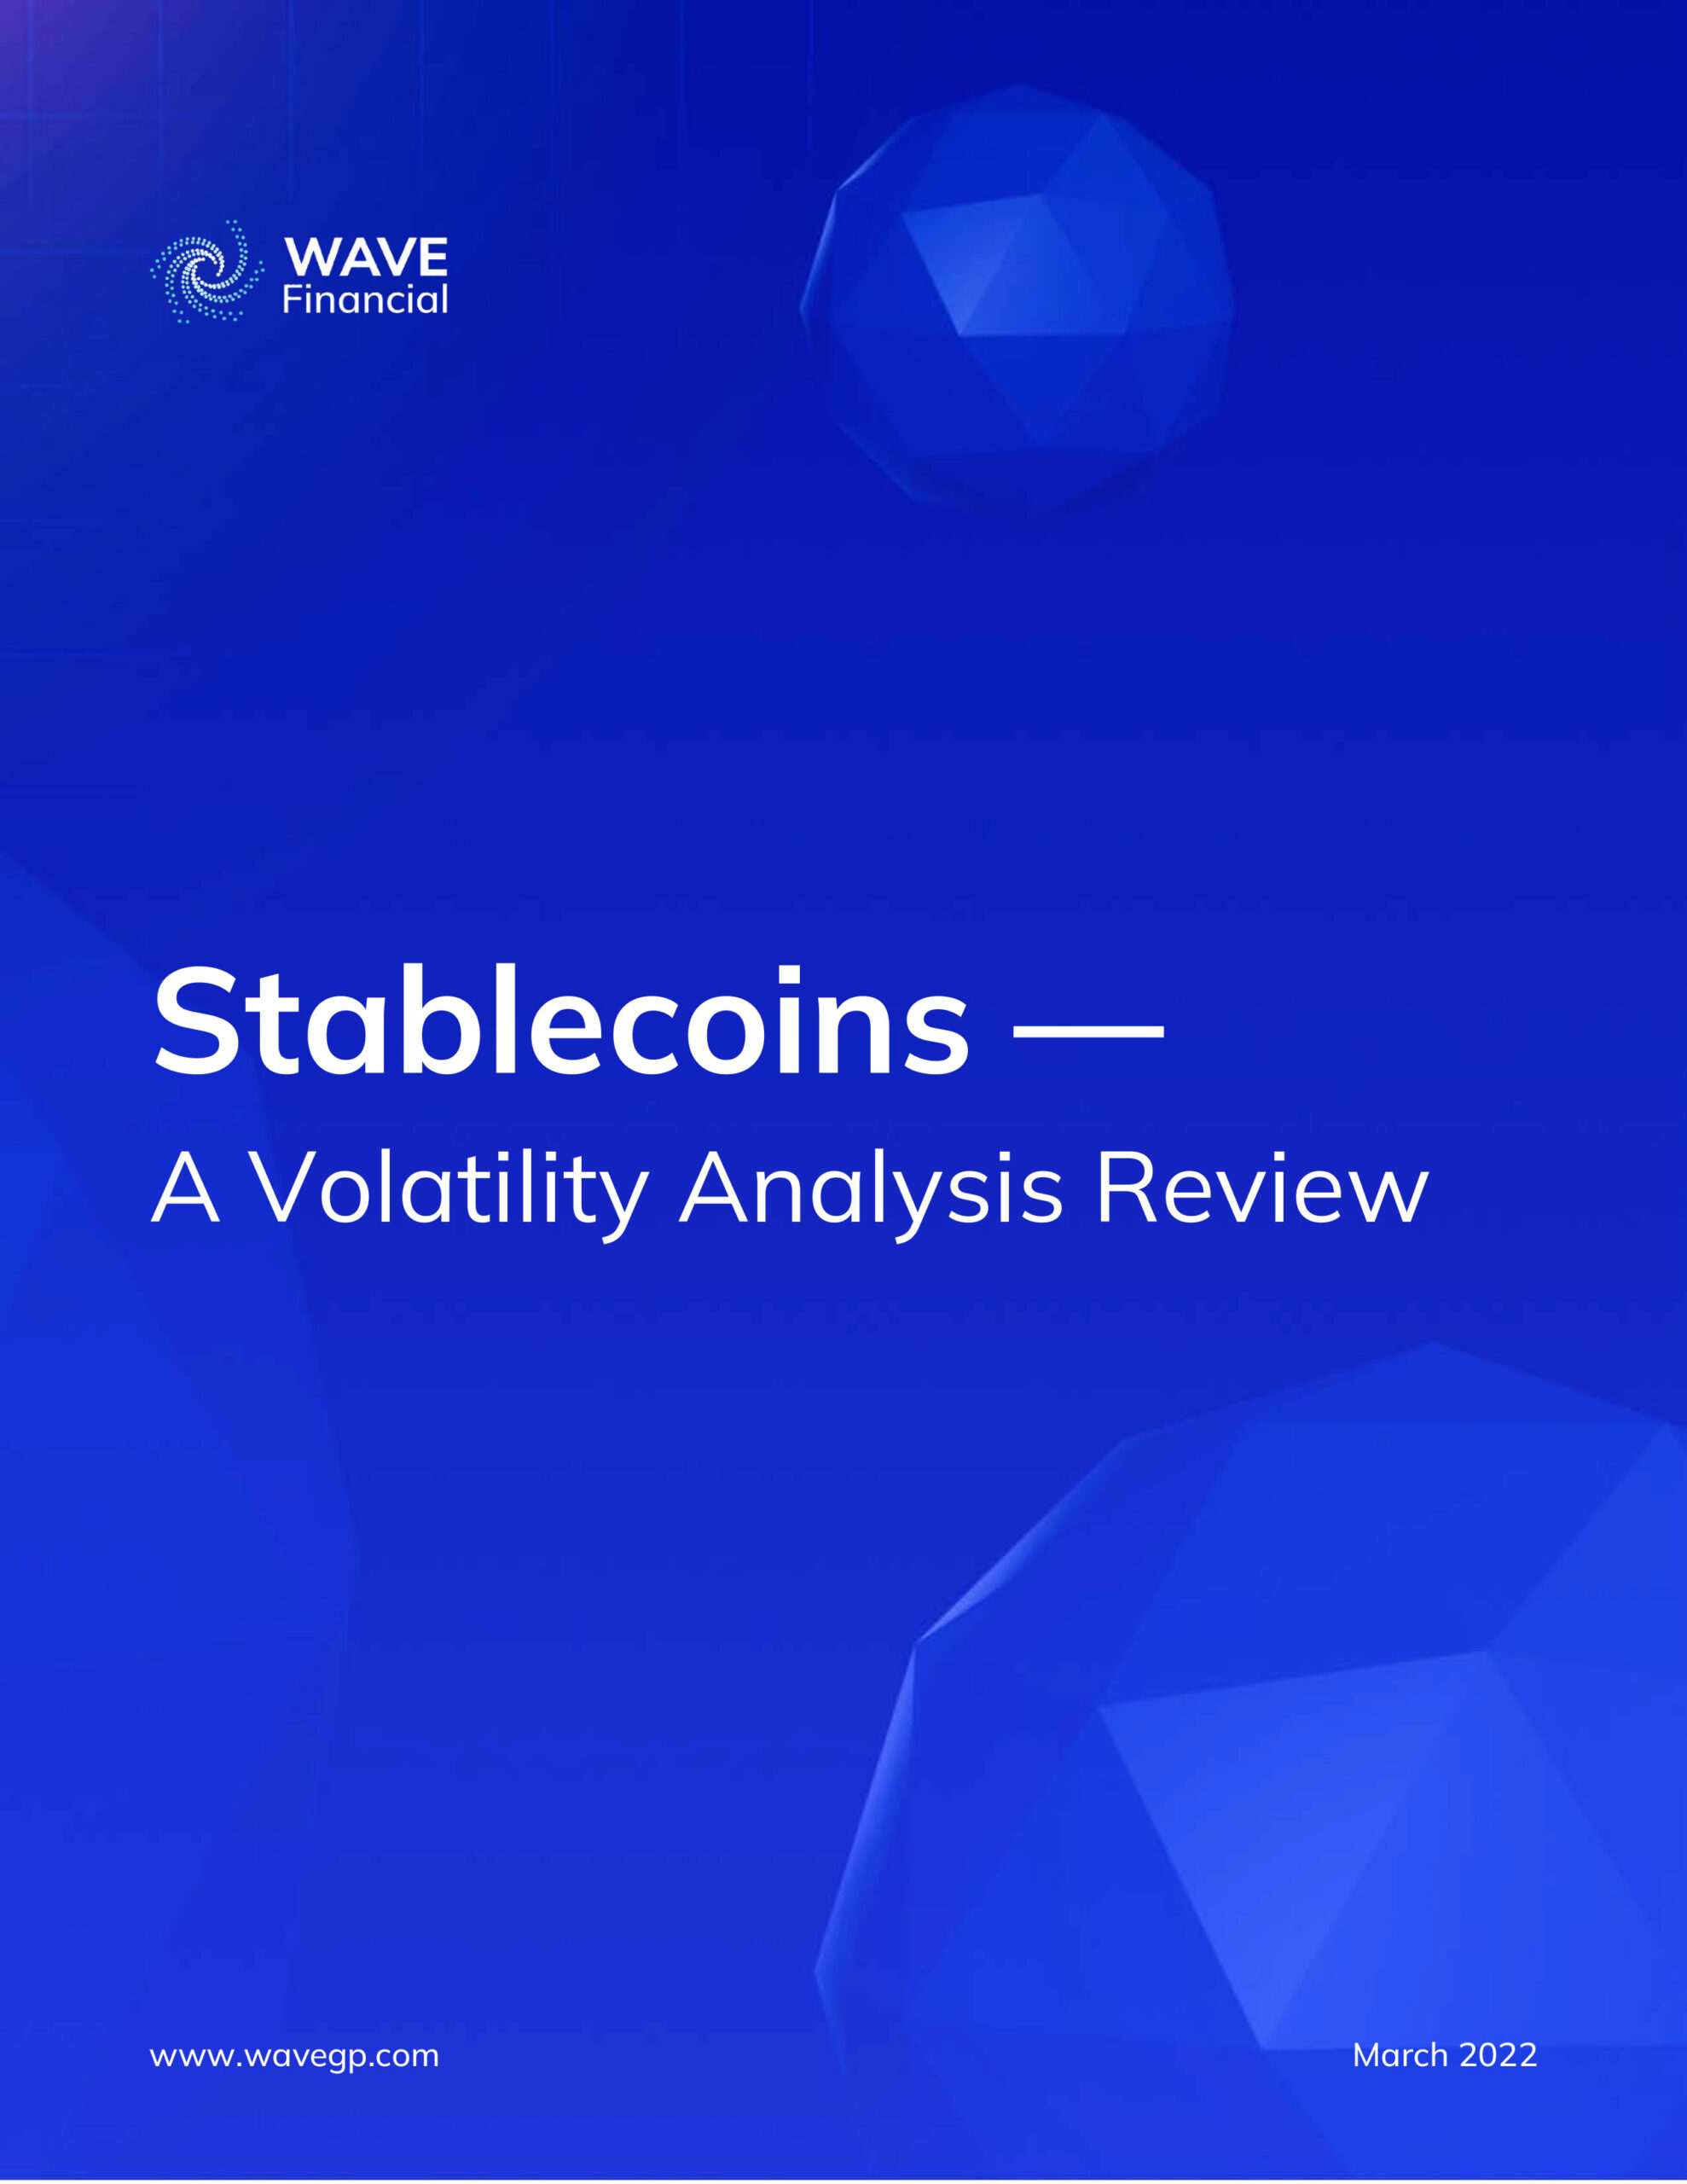 Stablecoin Research